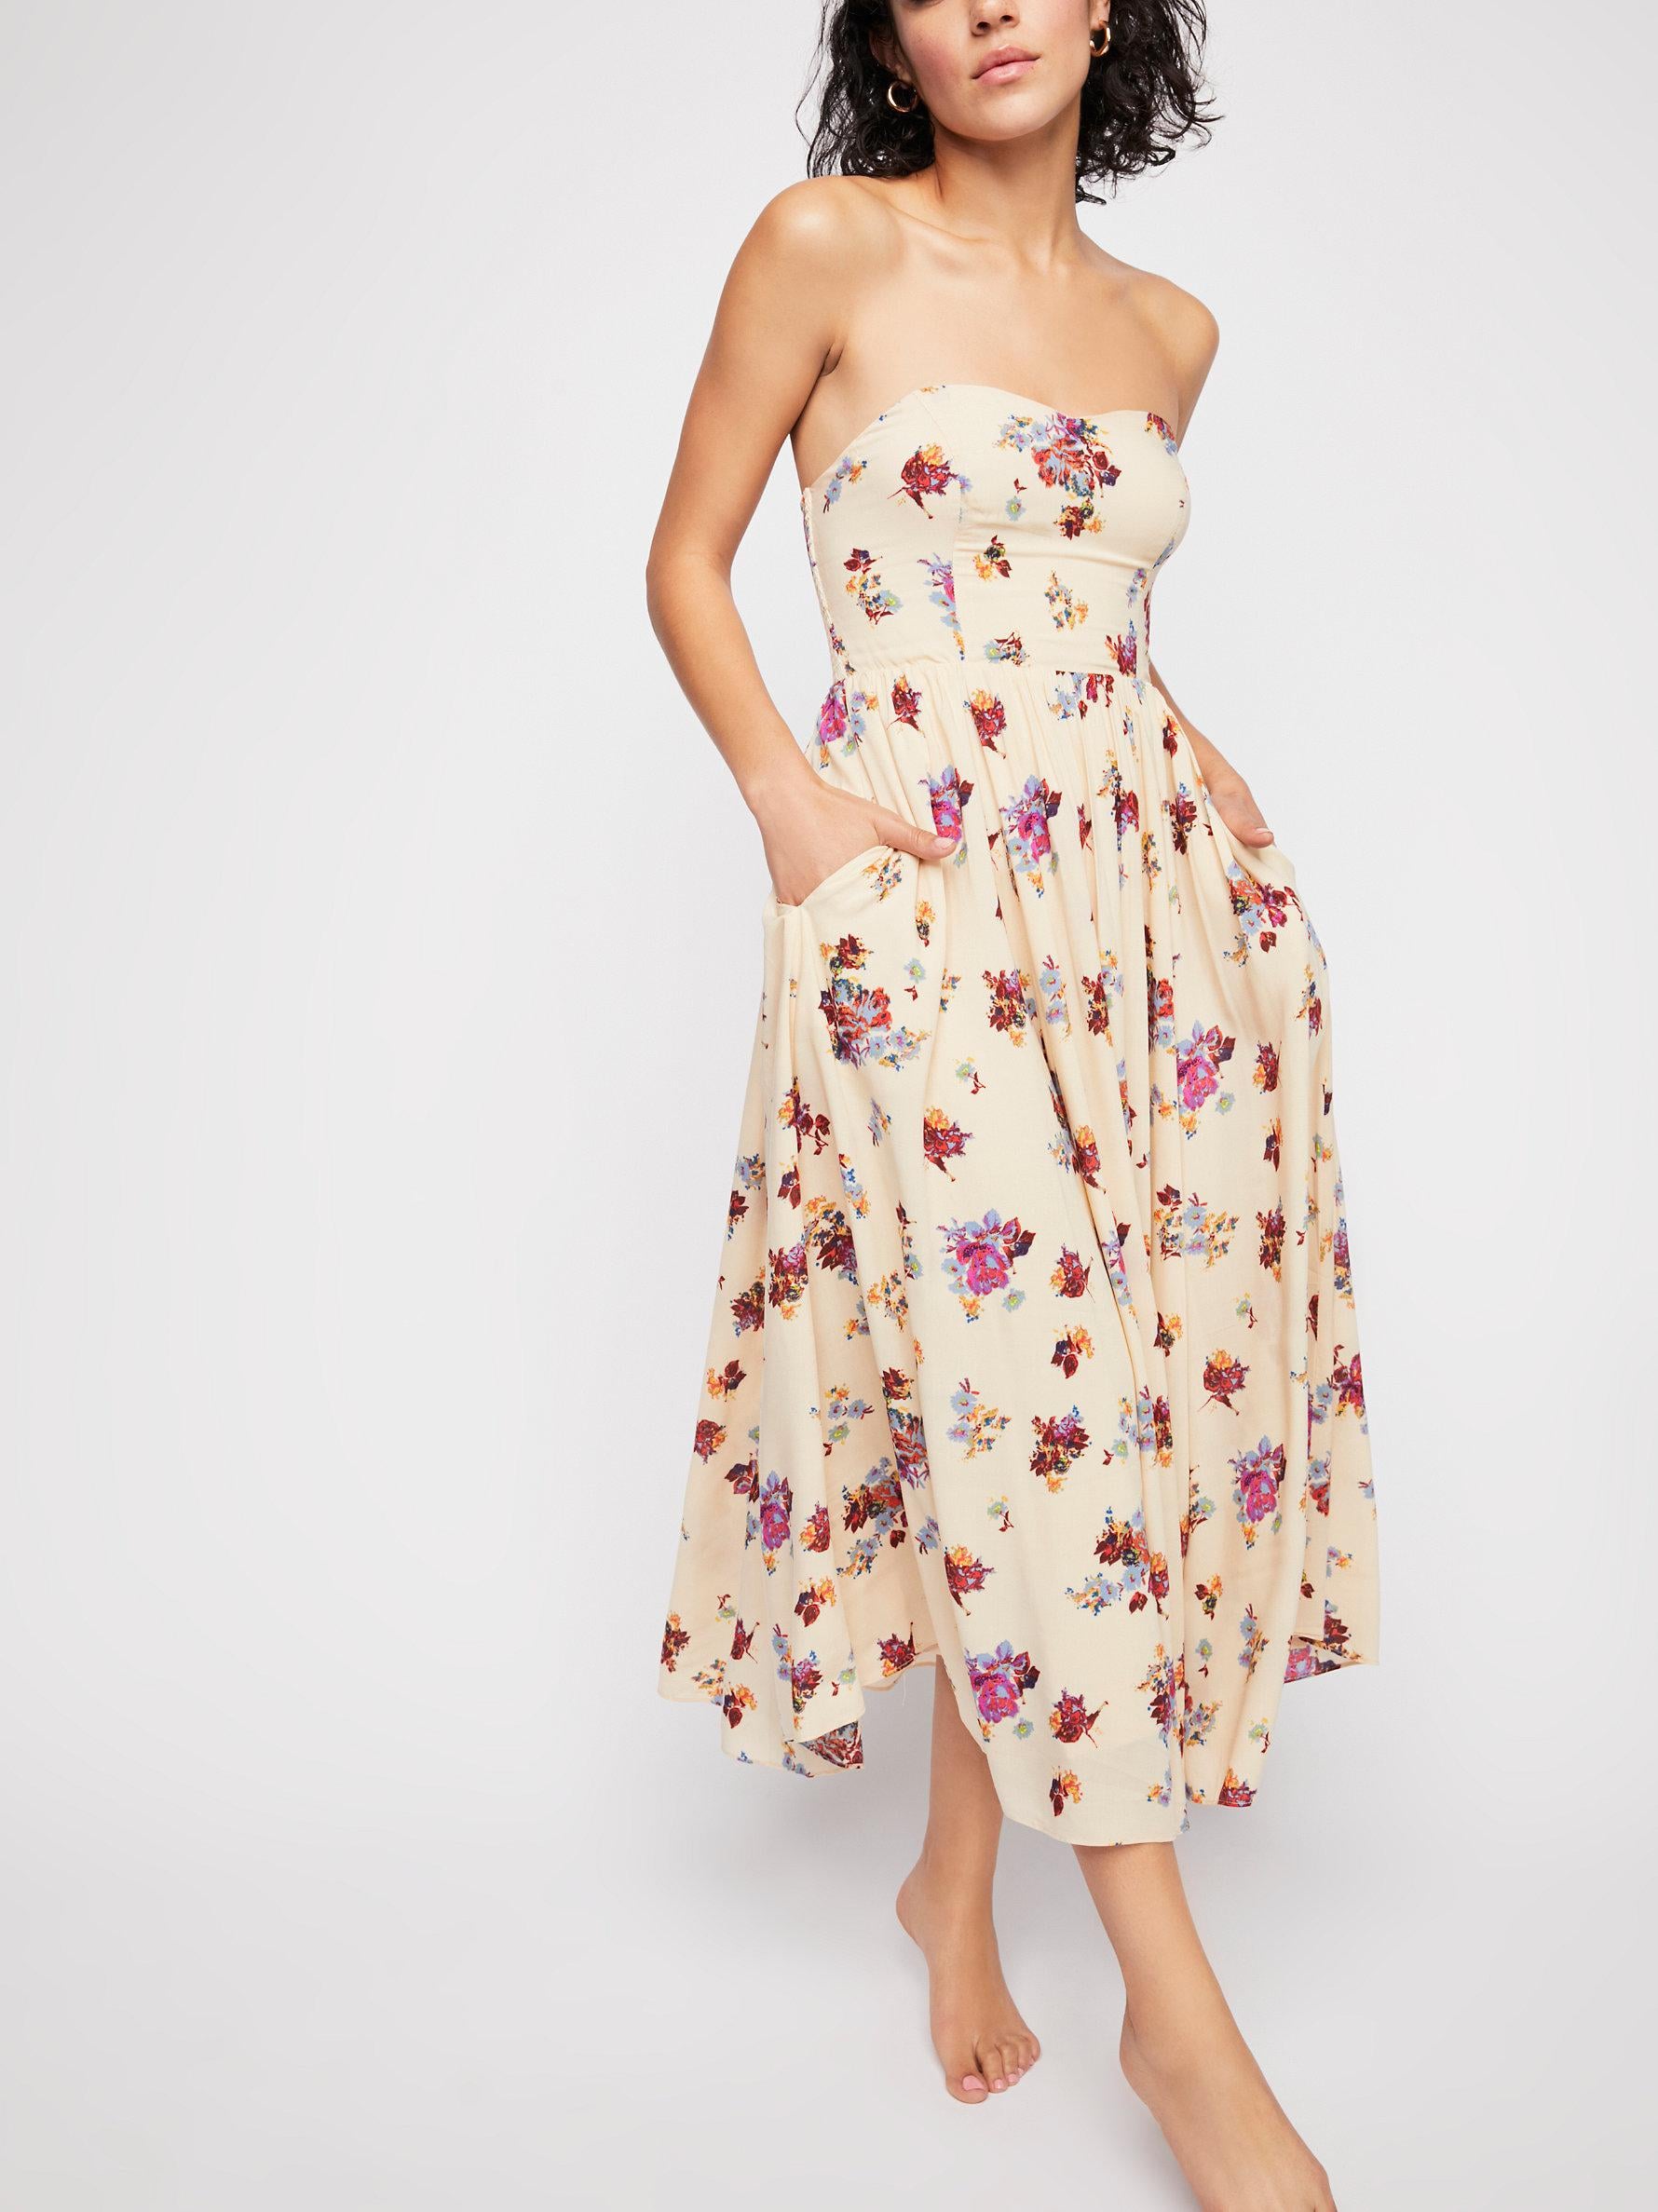 Wedding Guest Dresses at Free People ...